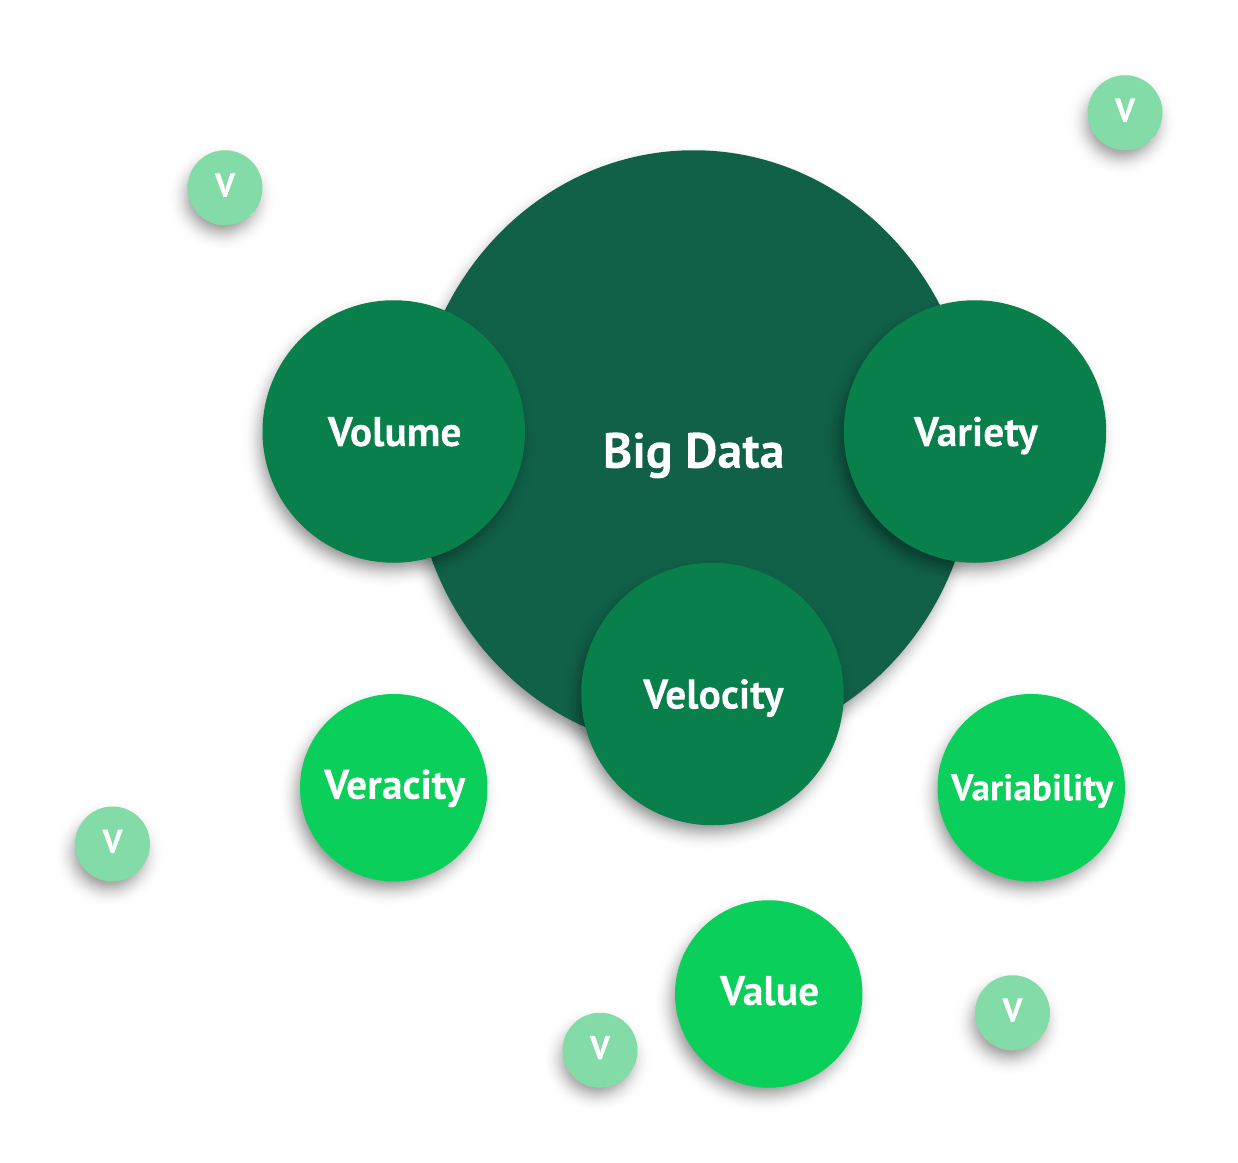 An illustration of the three Vs of big data: Volume, Velocity, and Variety.